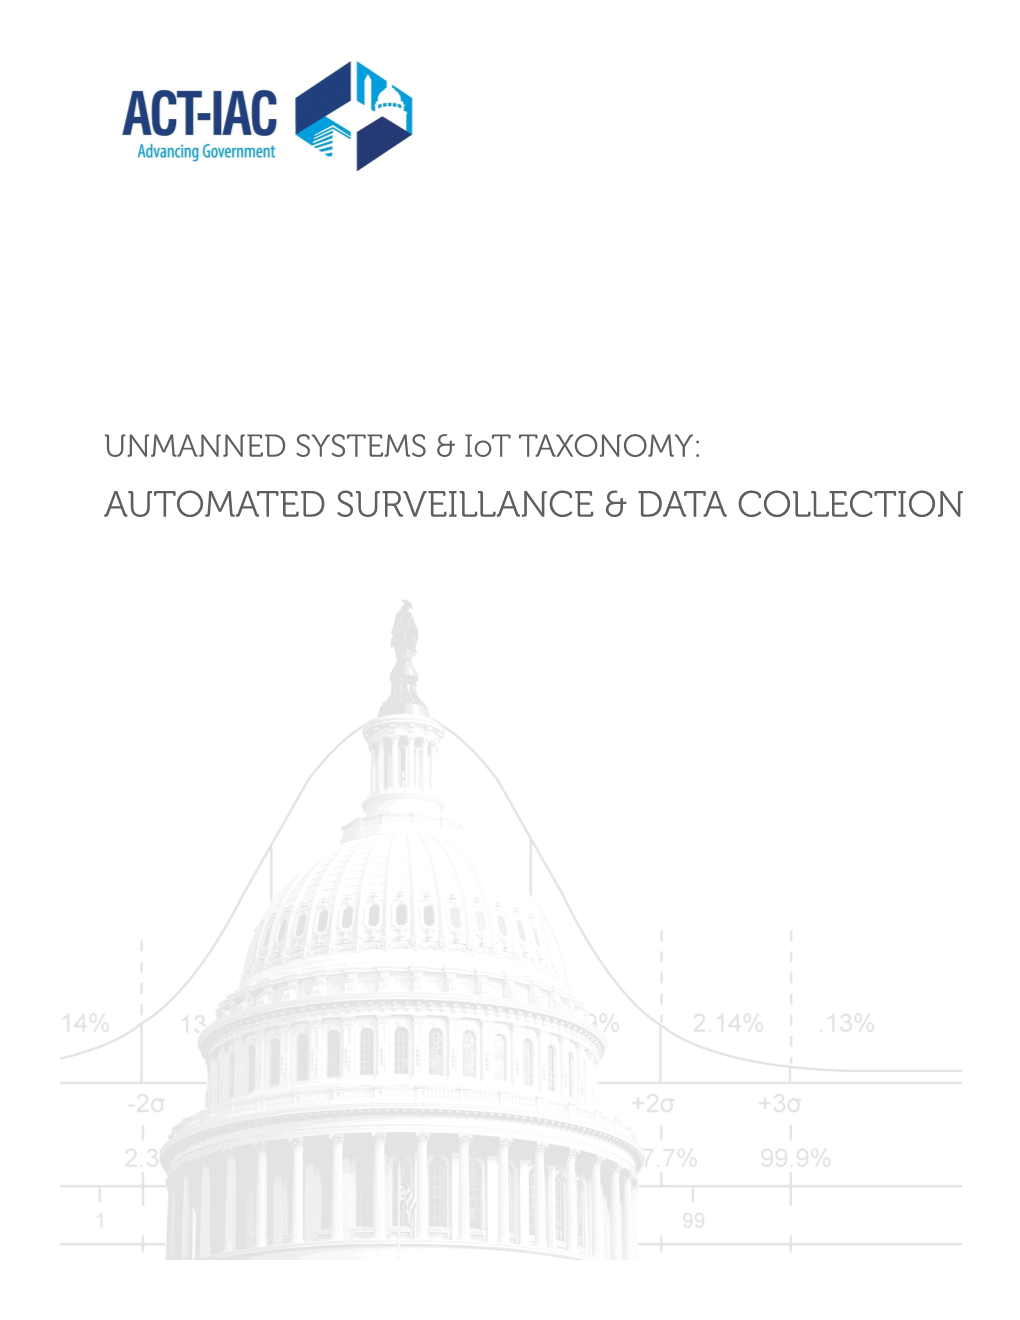 Automated Surveillance & Data Collection